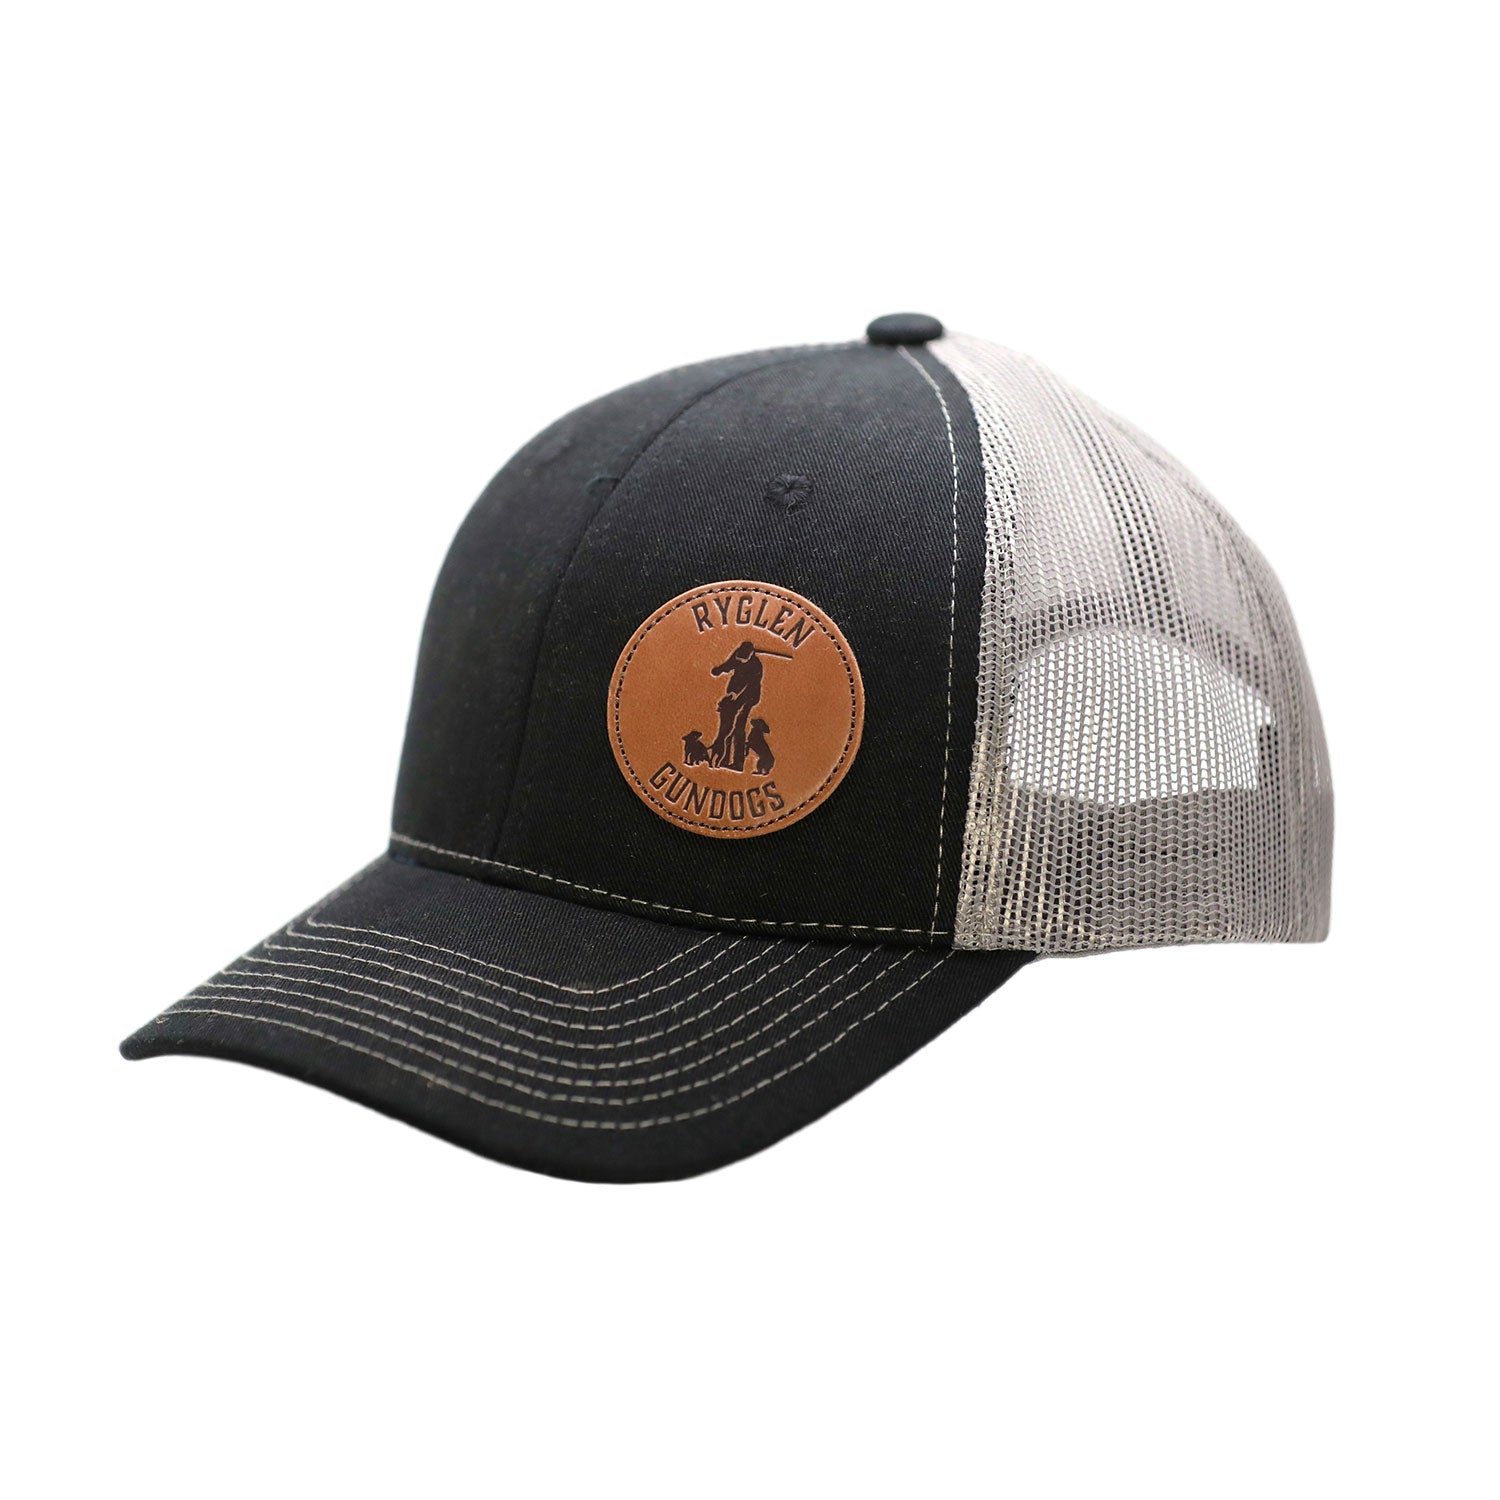 Ryglen Hat - Black and grey with Leather Patch